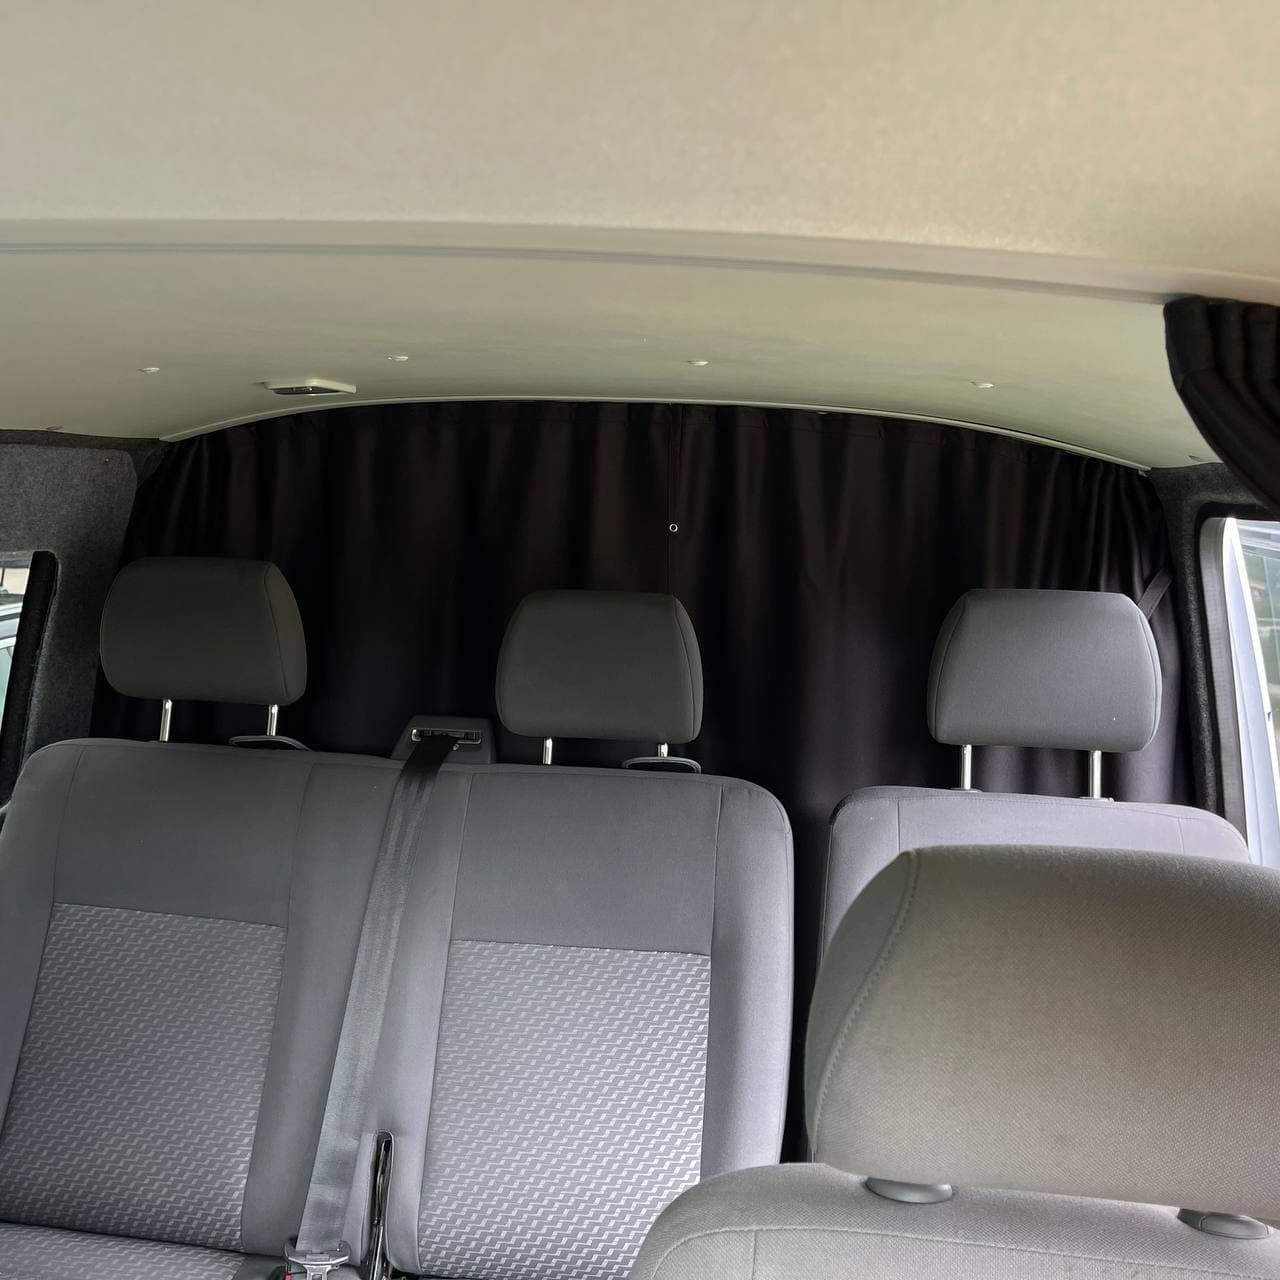 VW T5, T5.1 Transporter Rear Seat Cab Divider Curtain